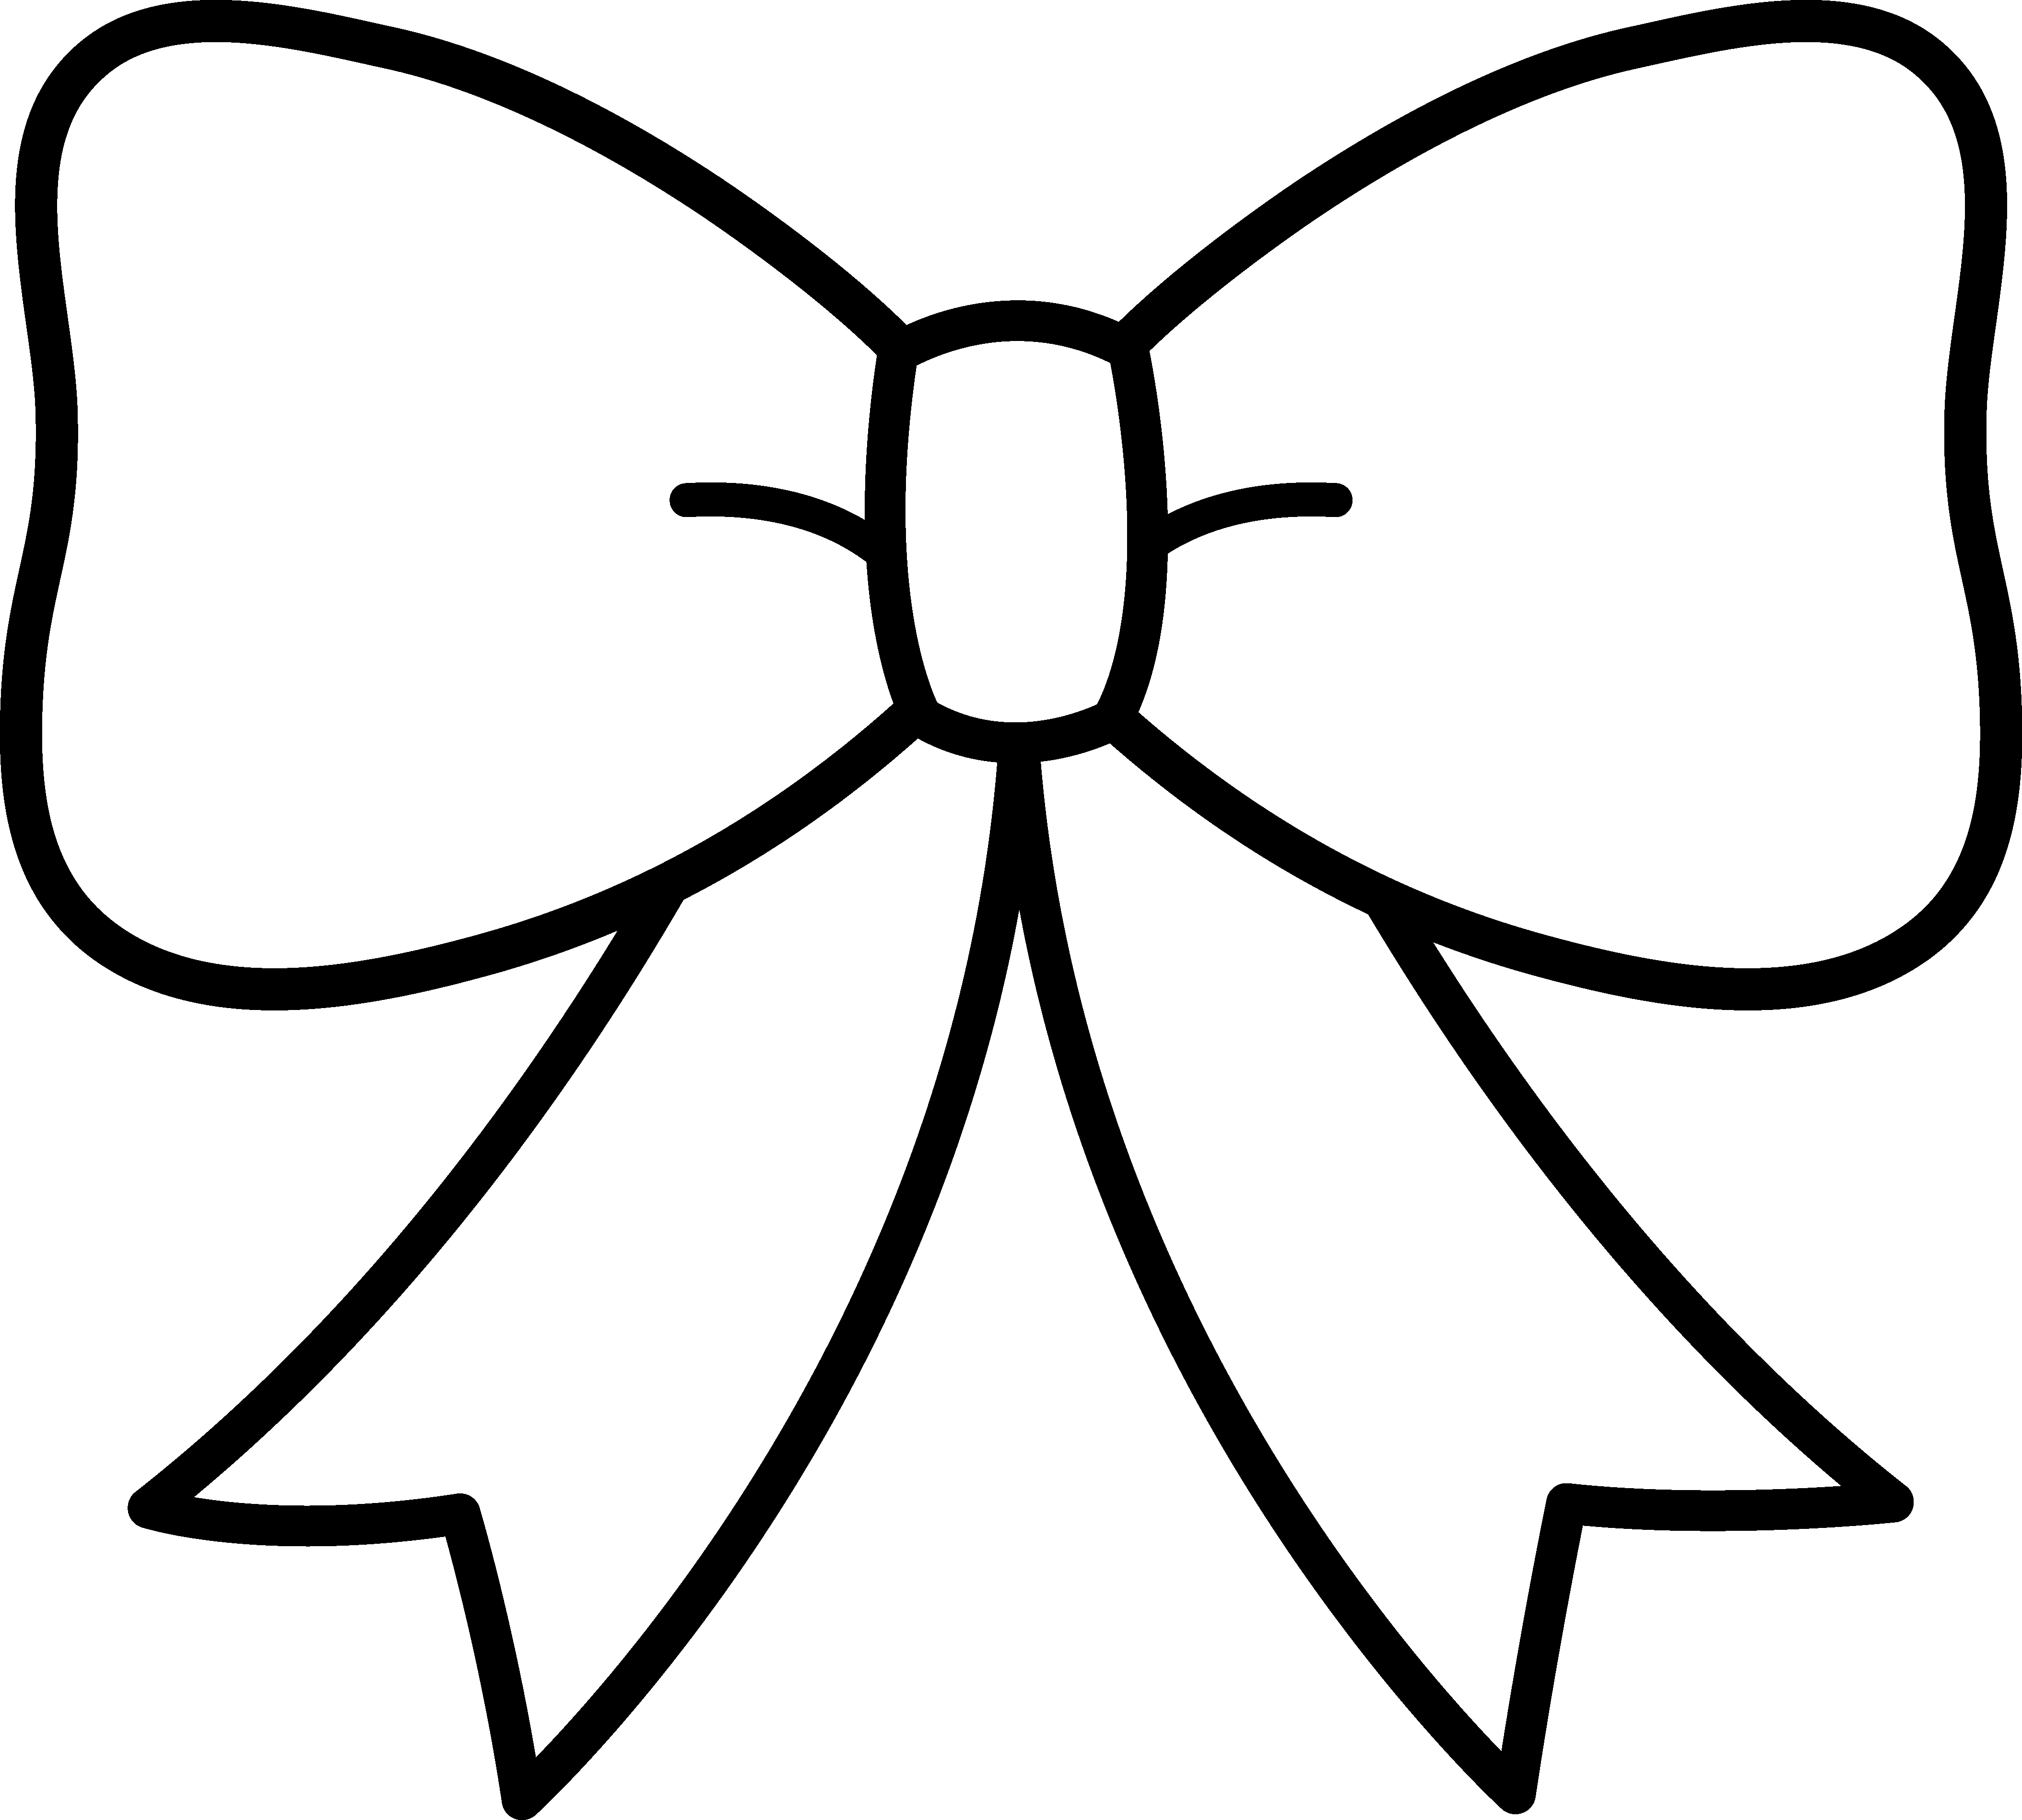 Bow black and white. Glasses clipart cheer